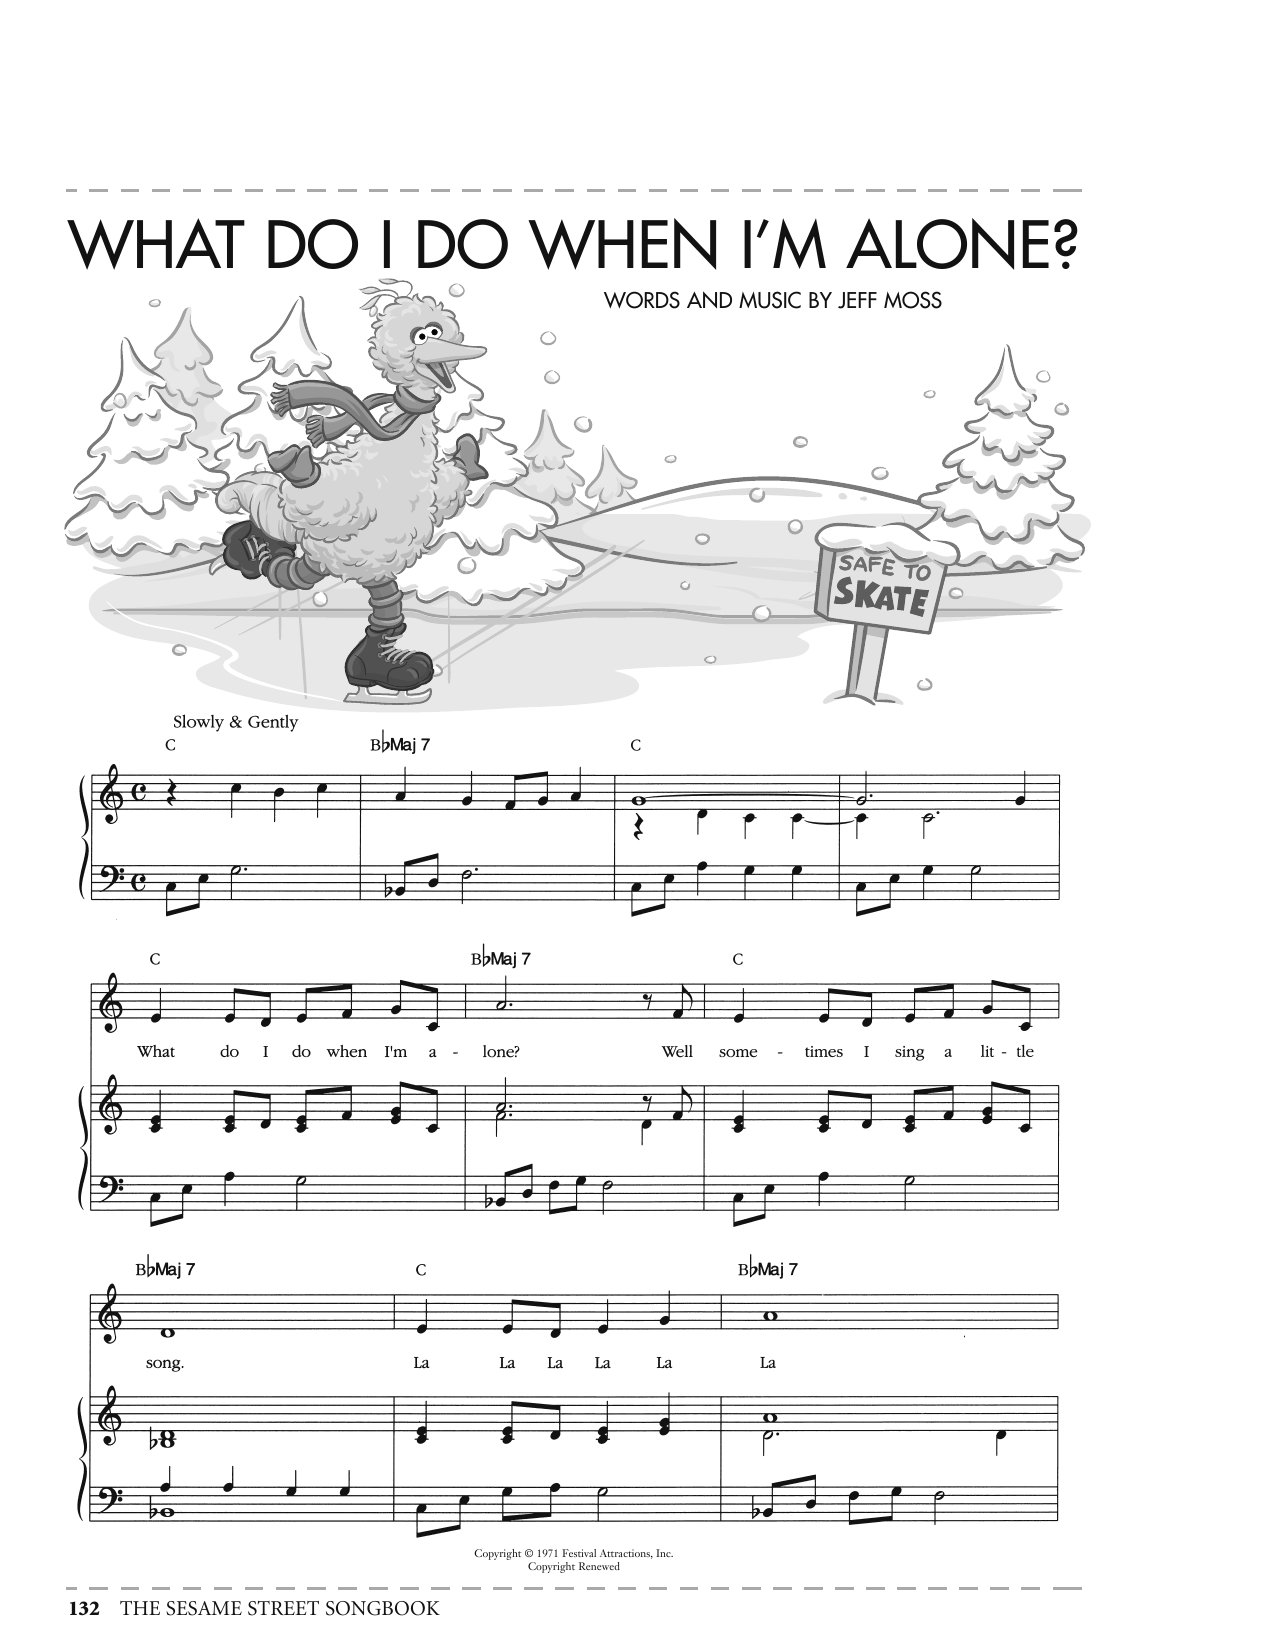 Jeff Moss What Do I Do When I'm Alone? (from Sesame Street) sheet music notes printable PDF score